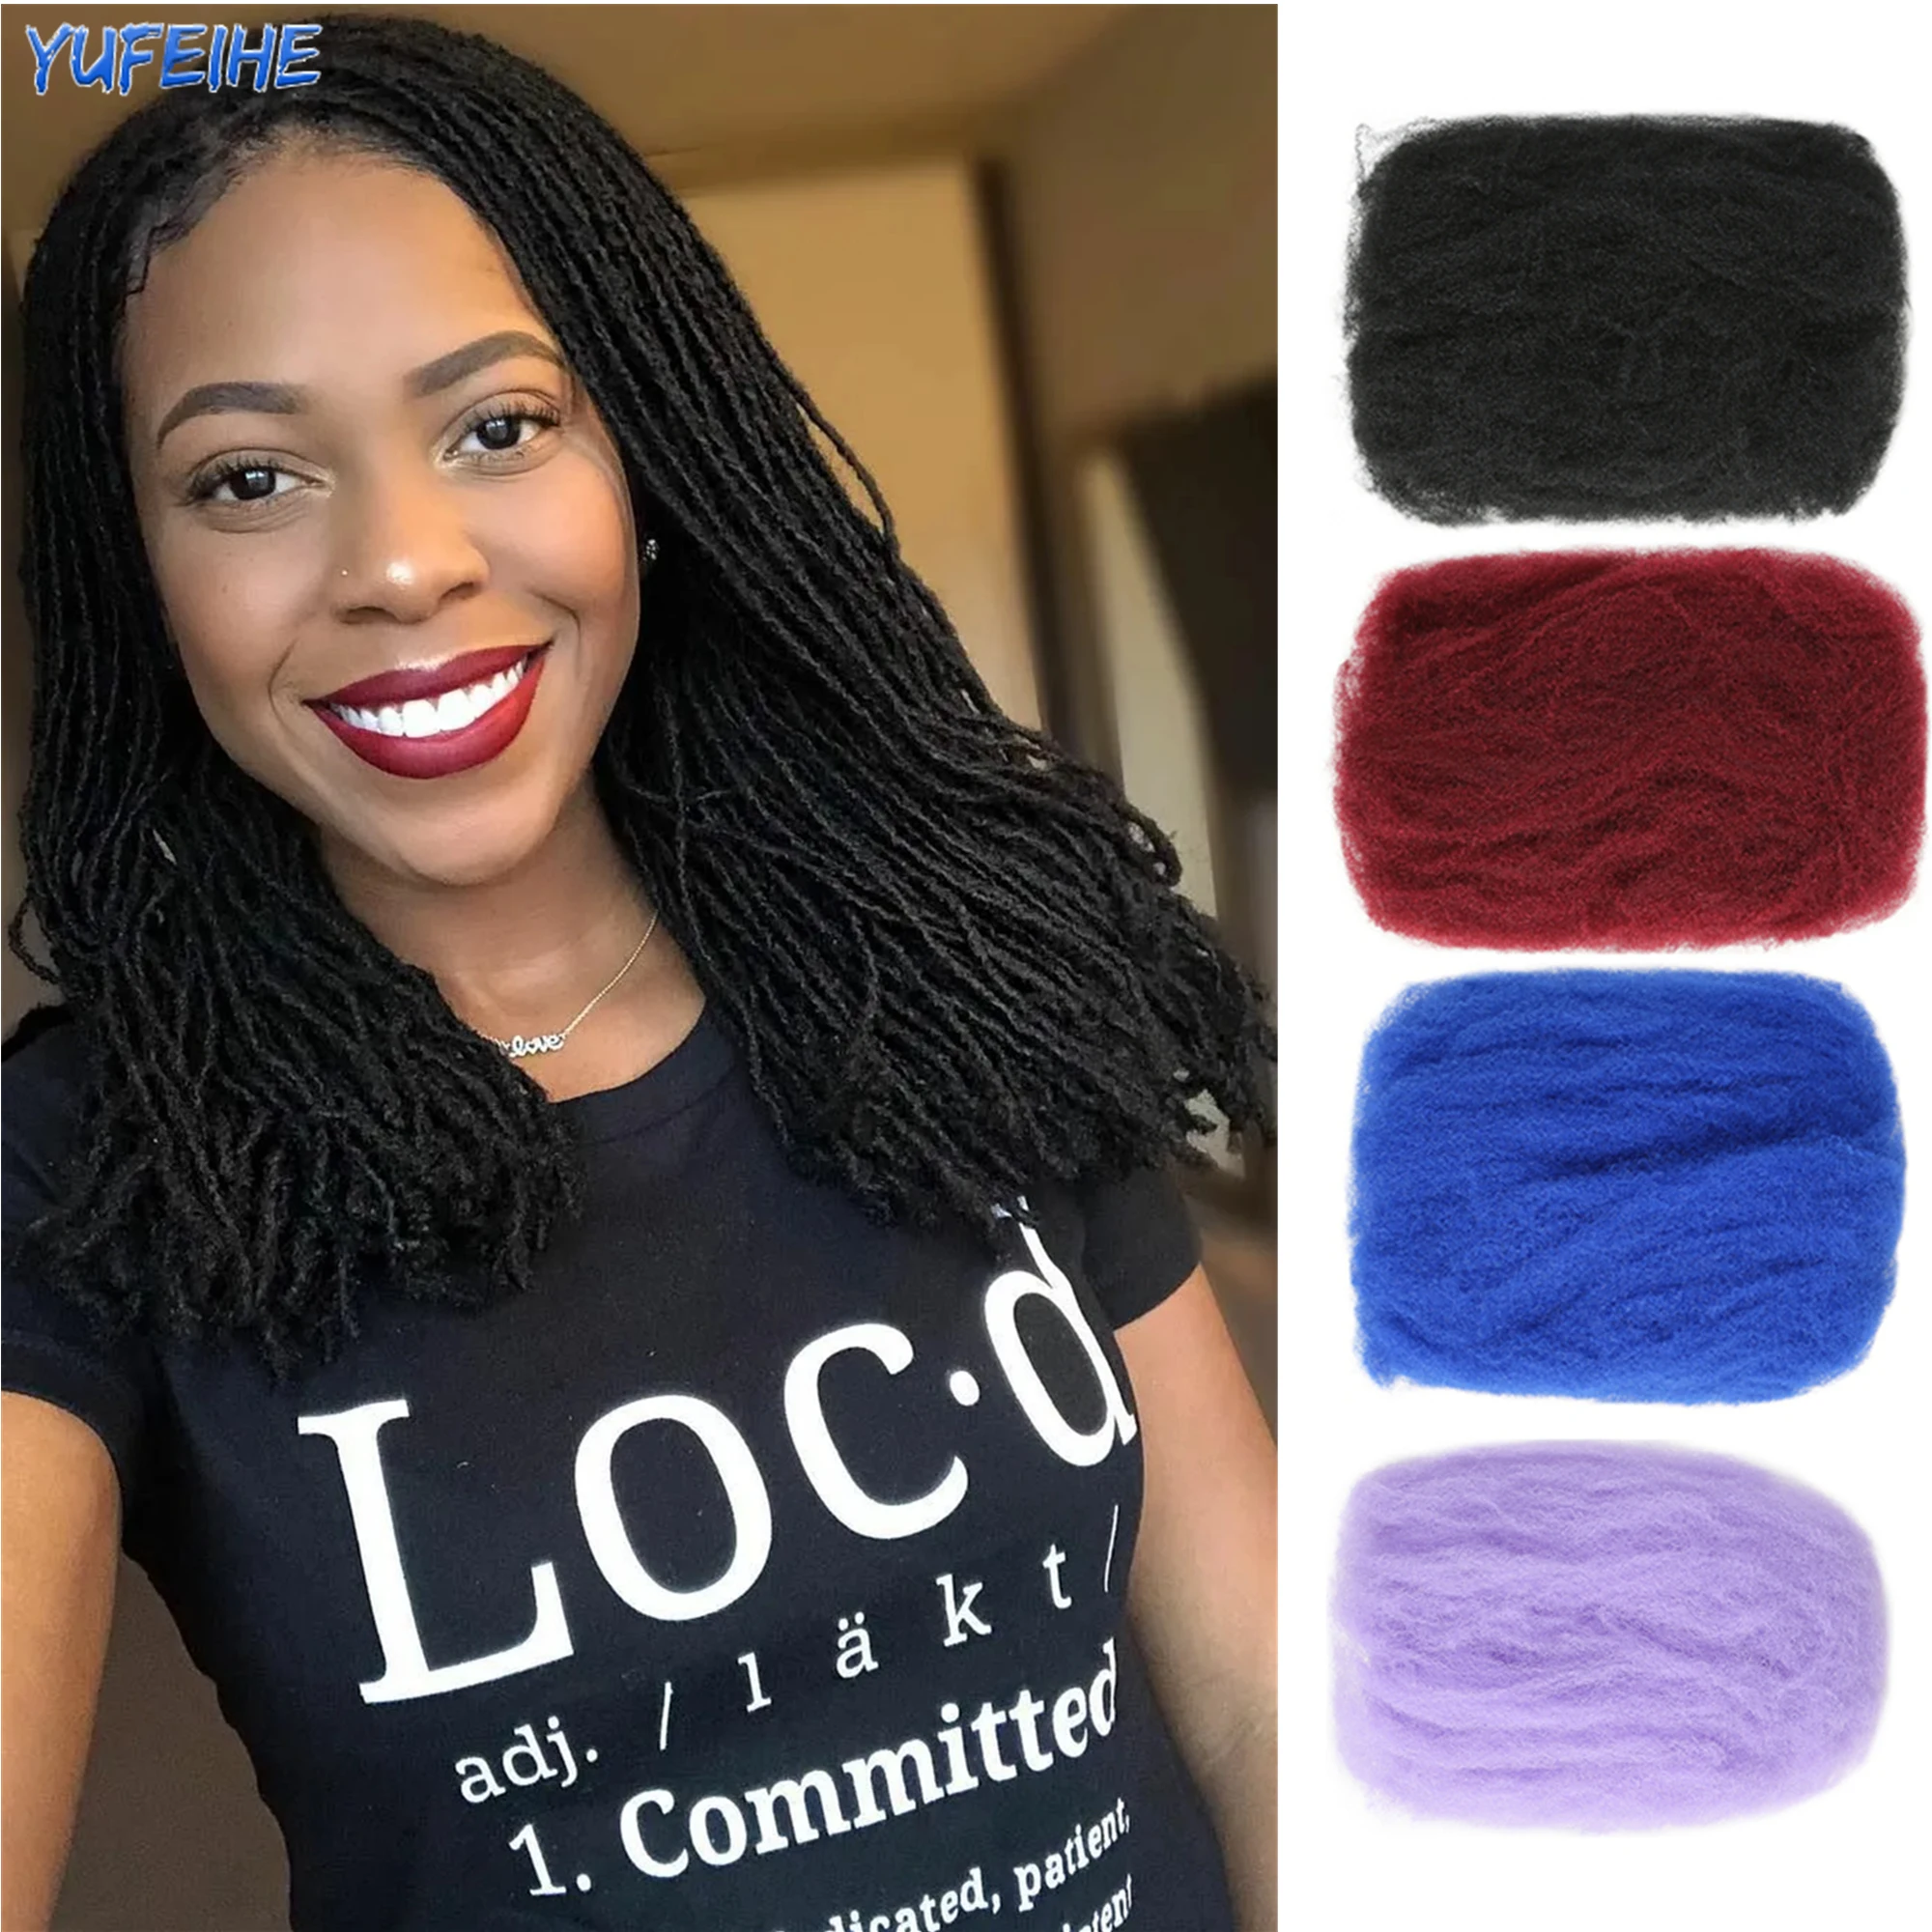 Synthetic Afro Kinky Bulk Crochet Braids Hair Extensions No Weft Hook Braids 50g / Pcs Hairpieces For Women Men Blonde Black Red